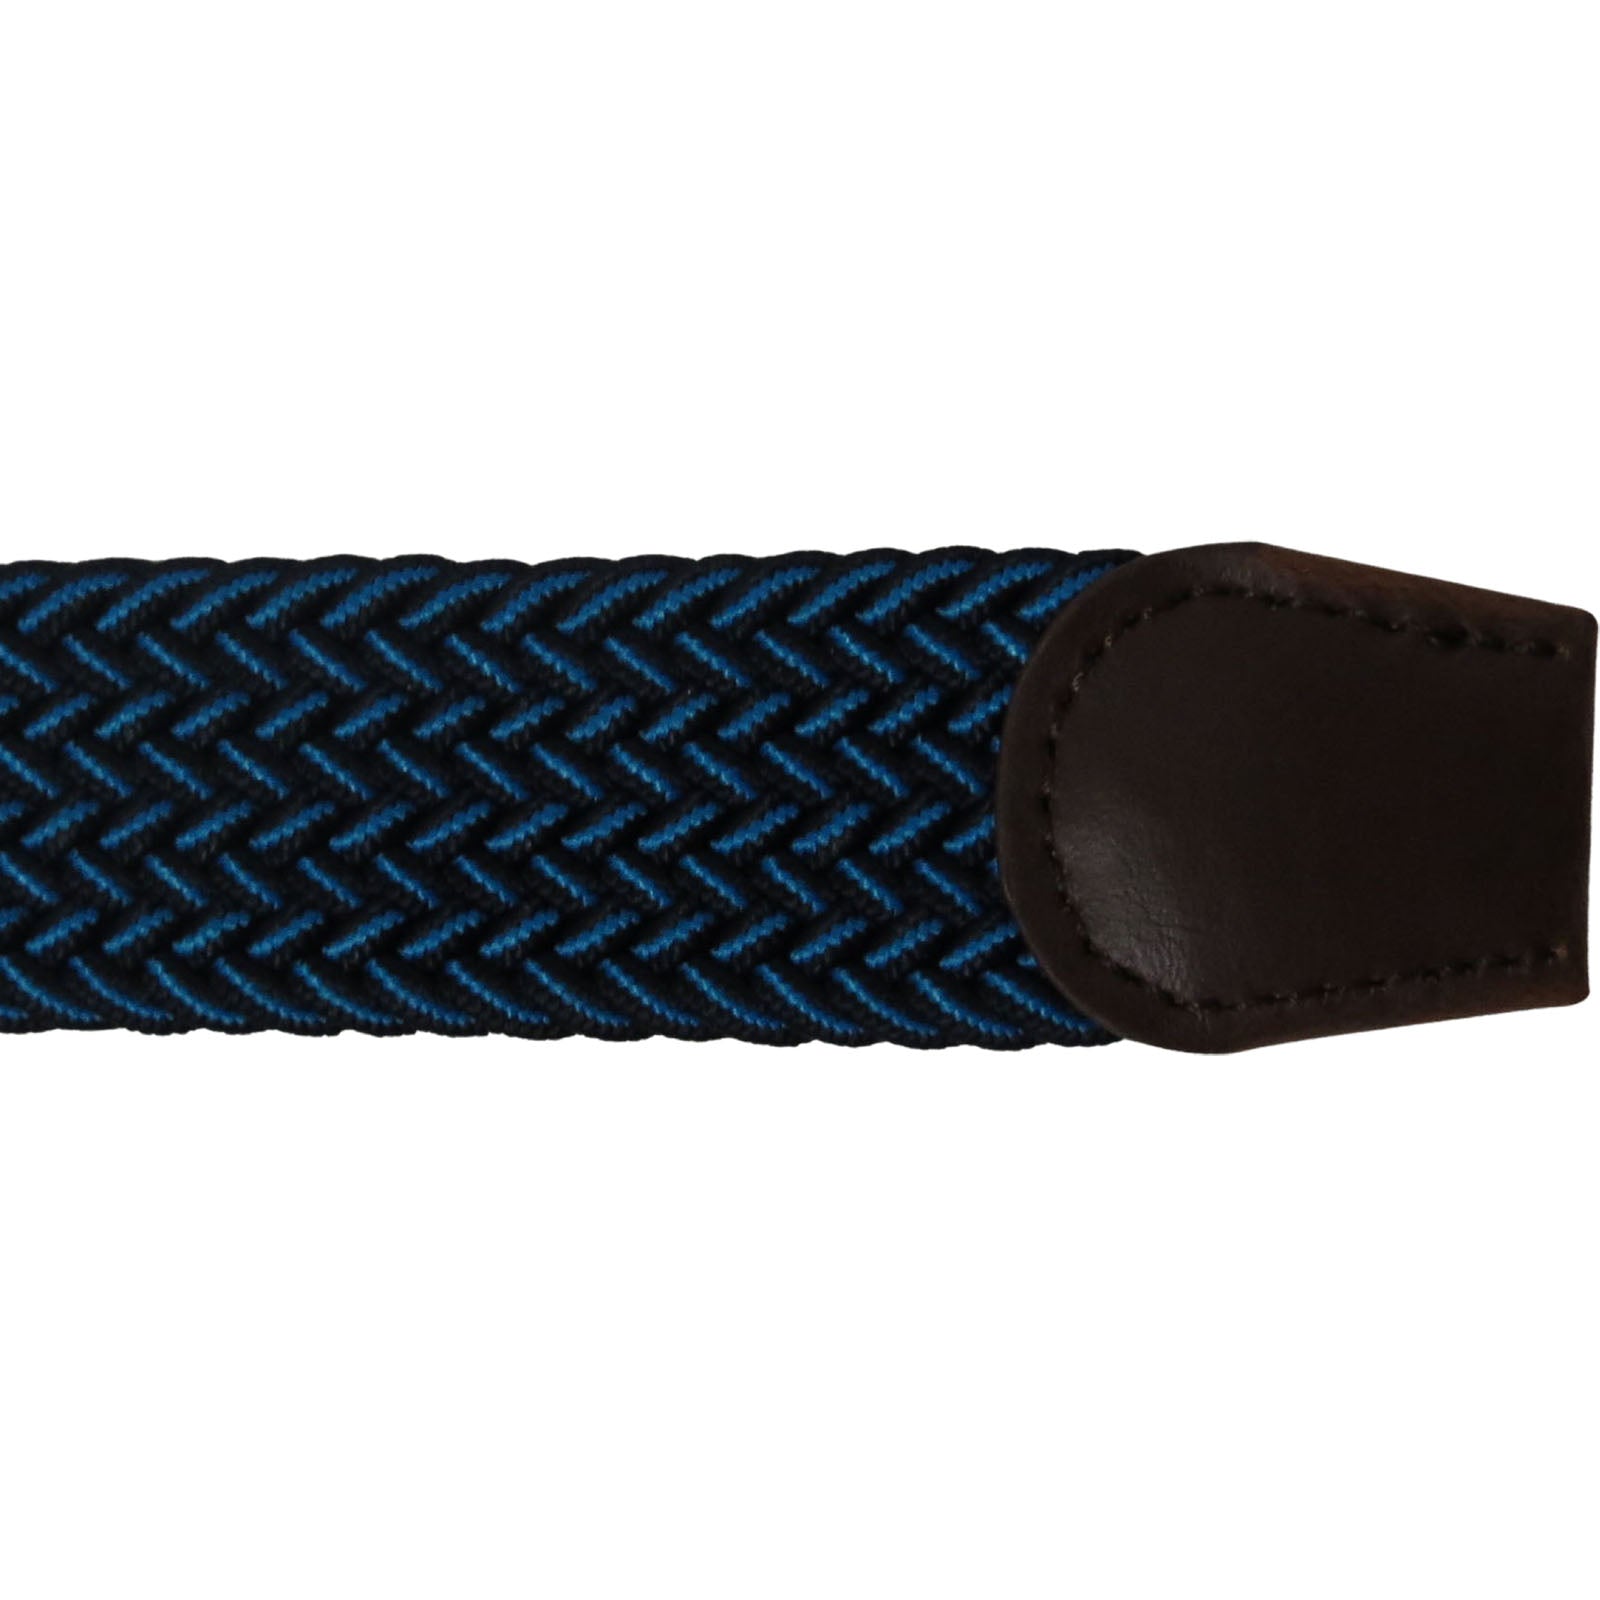 wholesale elastic stretch belt in a braided woven blue and black multicolor golf